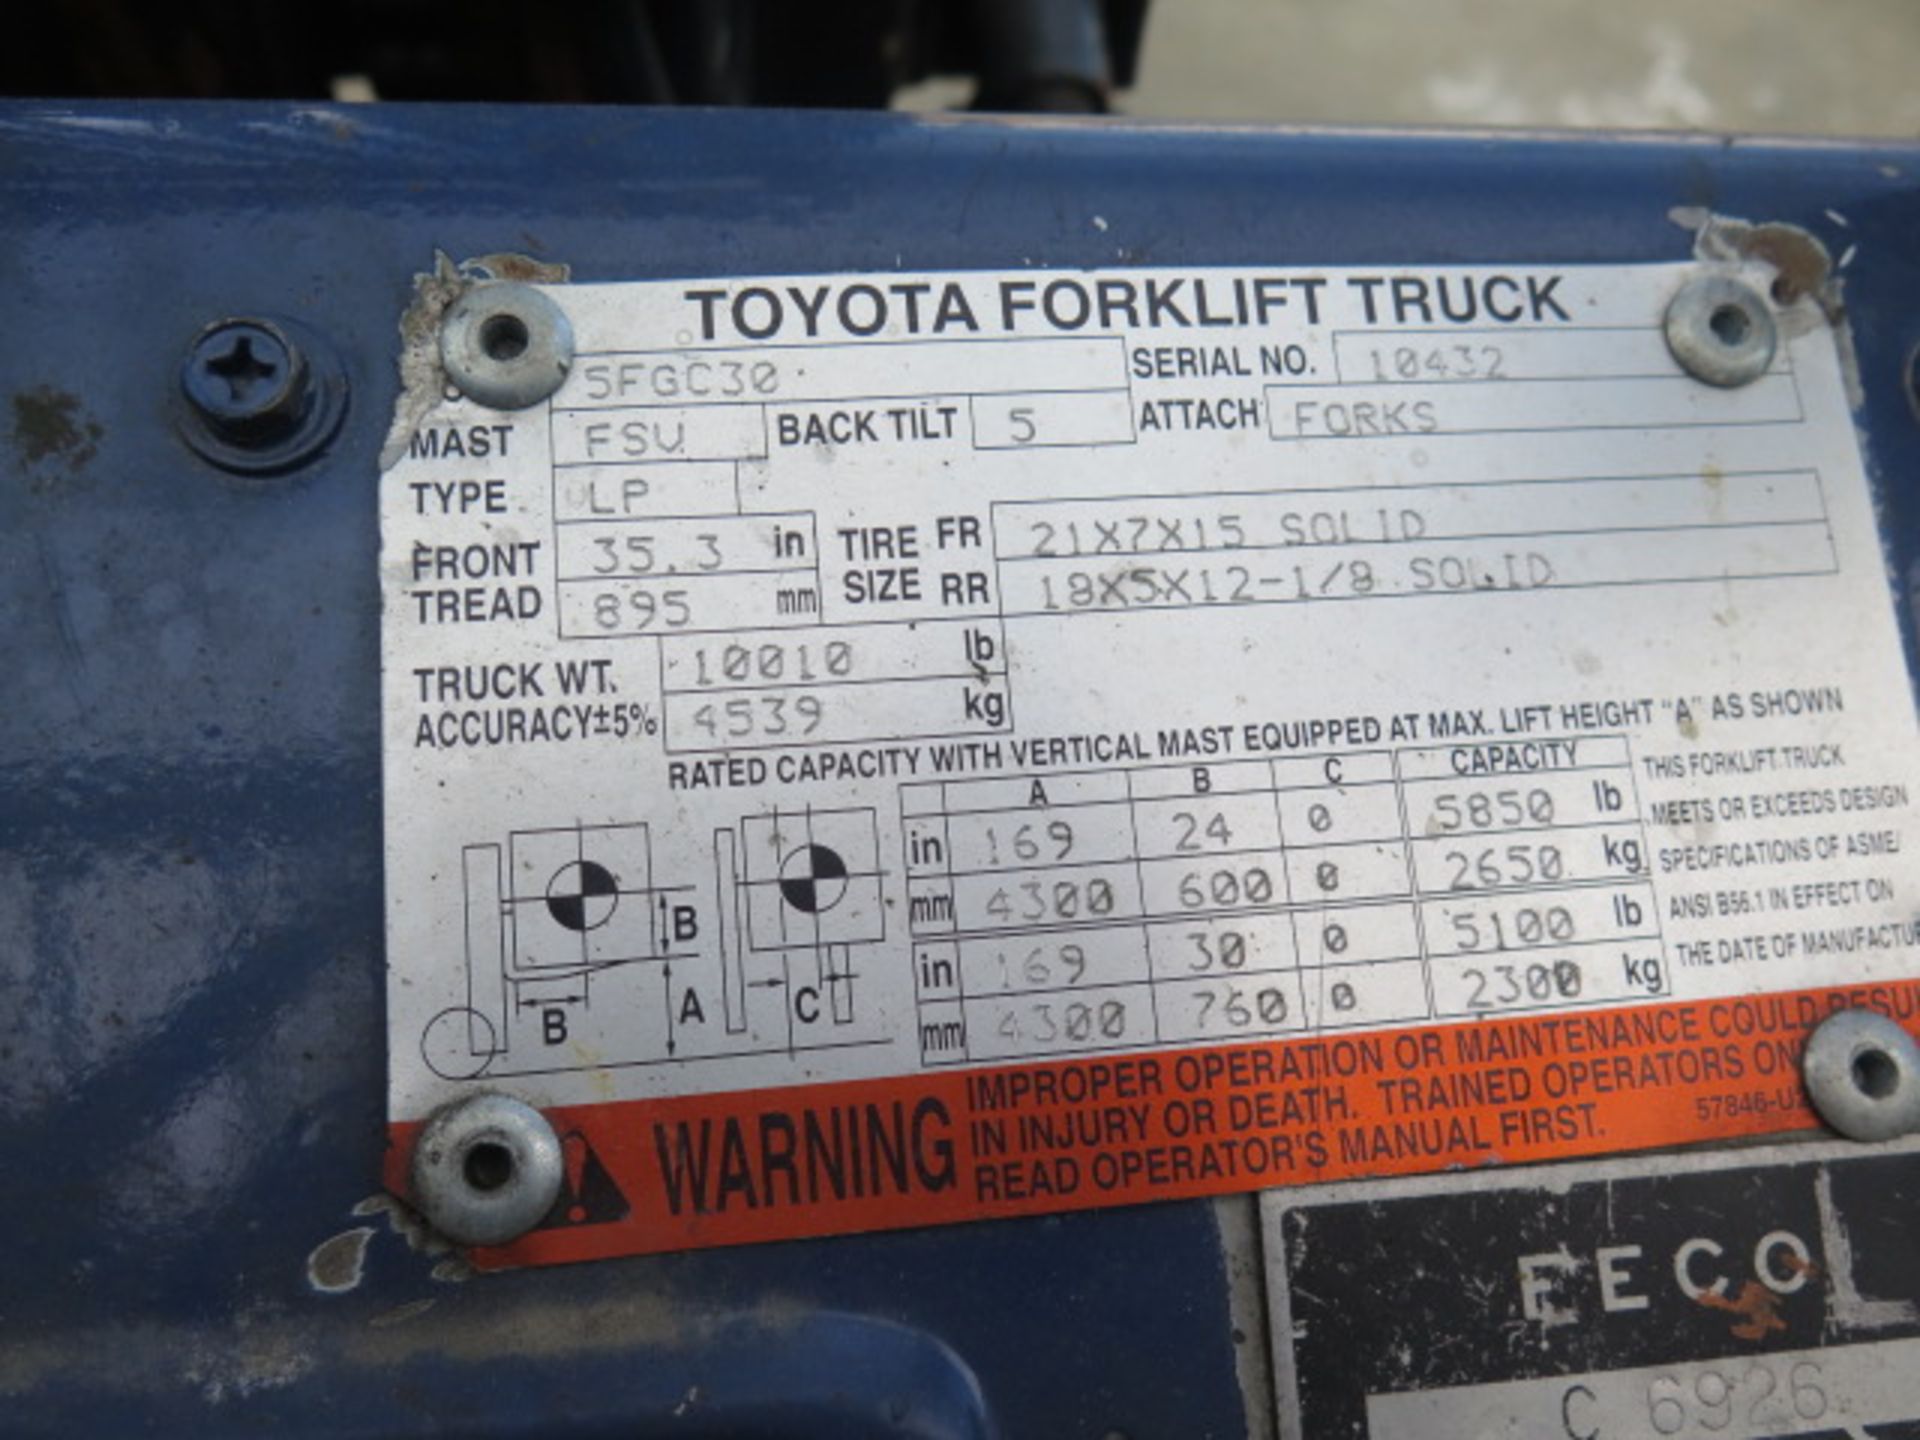 Toyota 5FGC30 6000 Lb Cap LPG Forklift s/n 10432 w/ 3-Stage Mast, 169" Lift Height, Cushion Tires, - Image 10 of 11